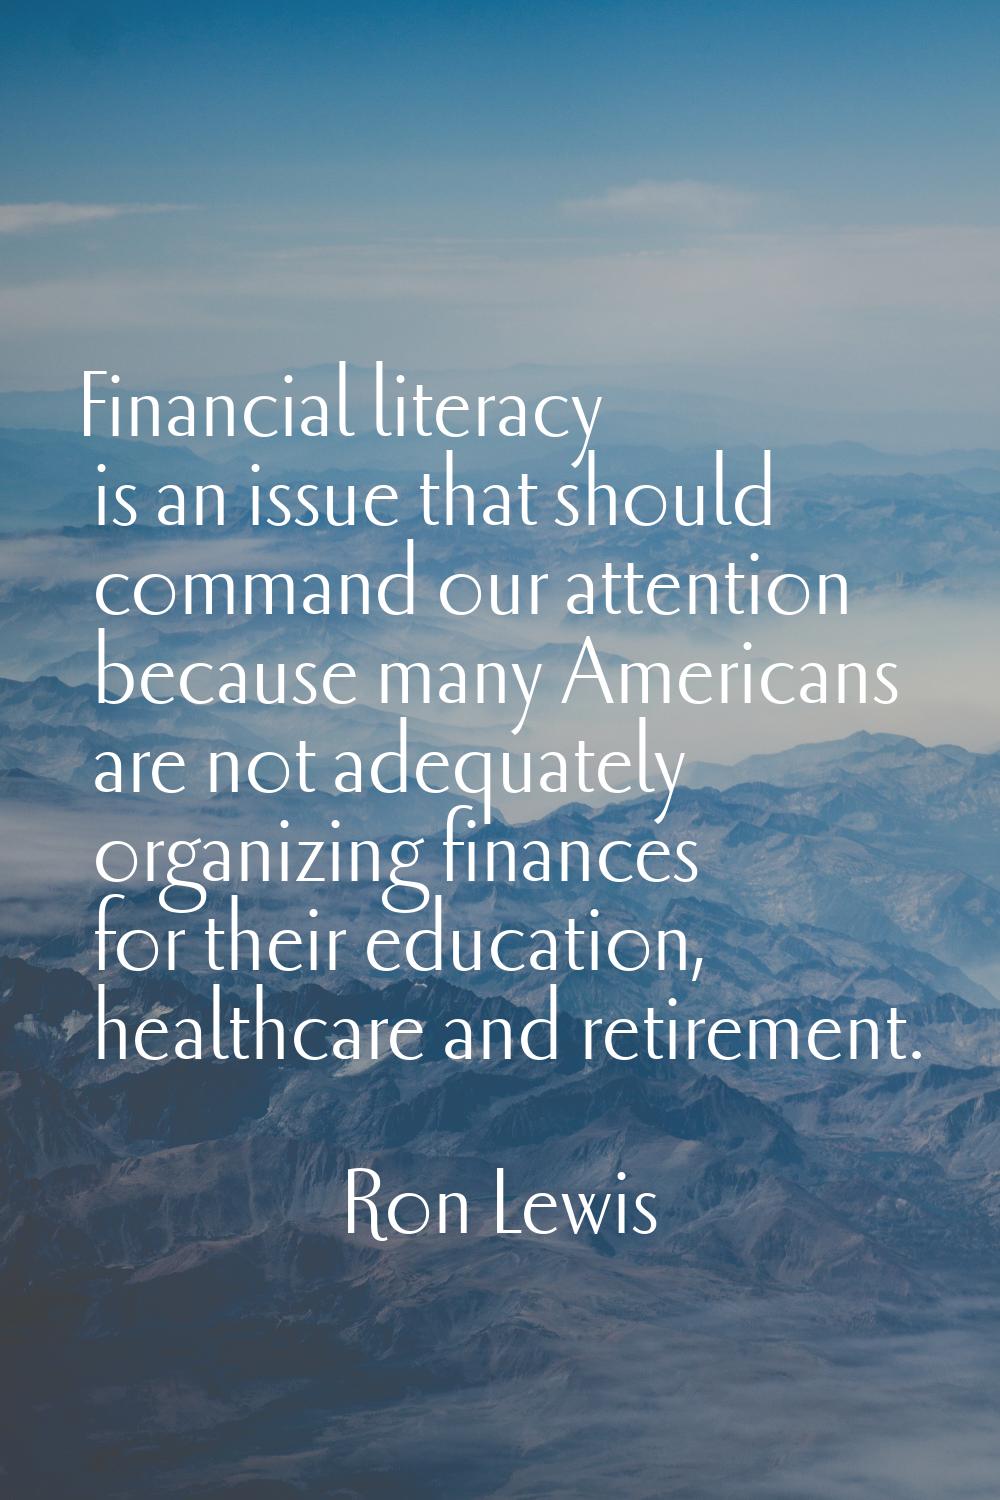 Financial literacy is an issue that should command our attention because many Americans are not ade